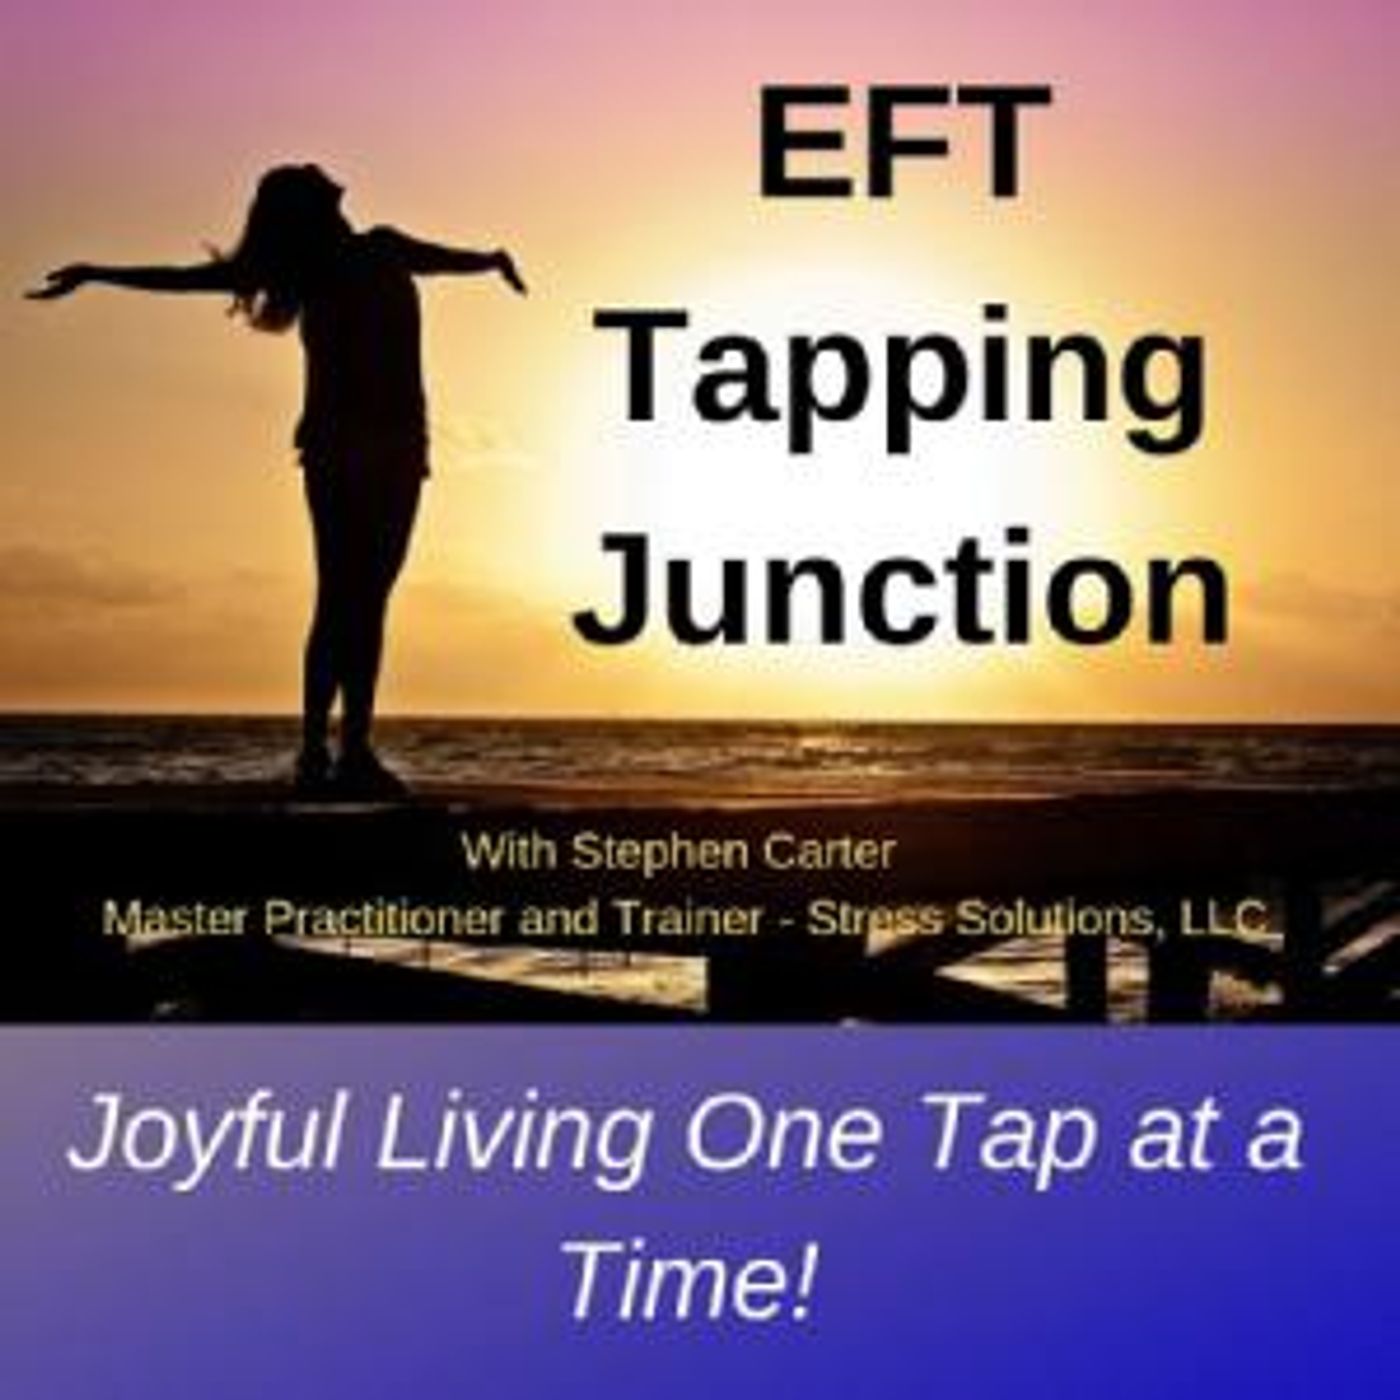 How to Apply the "Rule of 5" for Deeper EFT Results